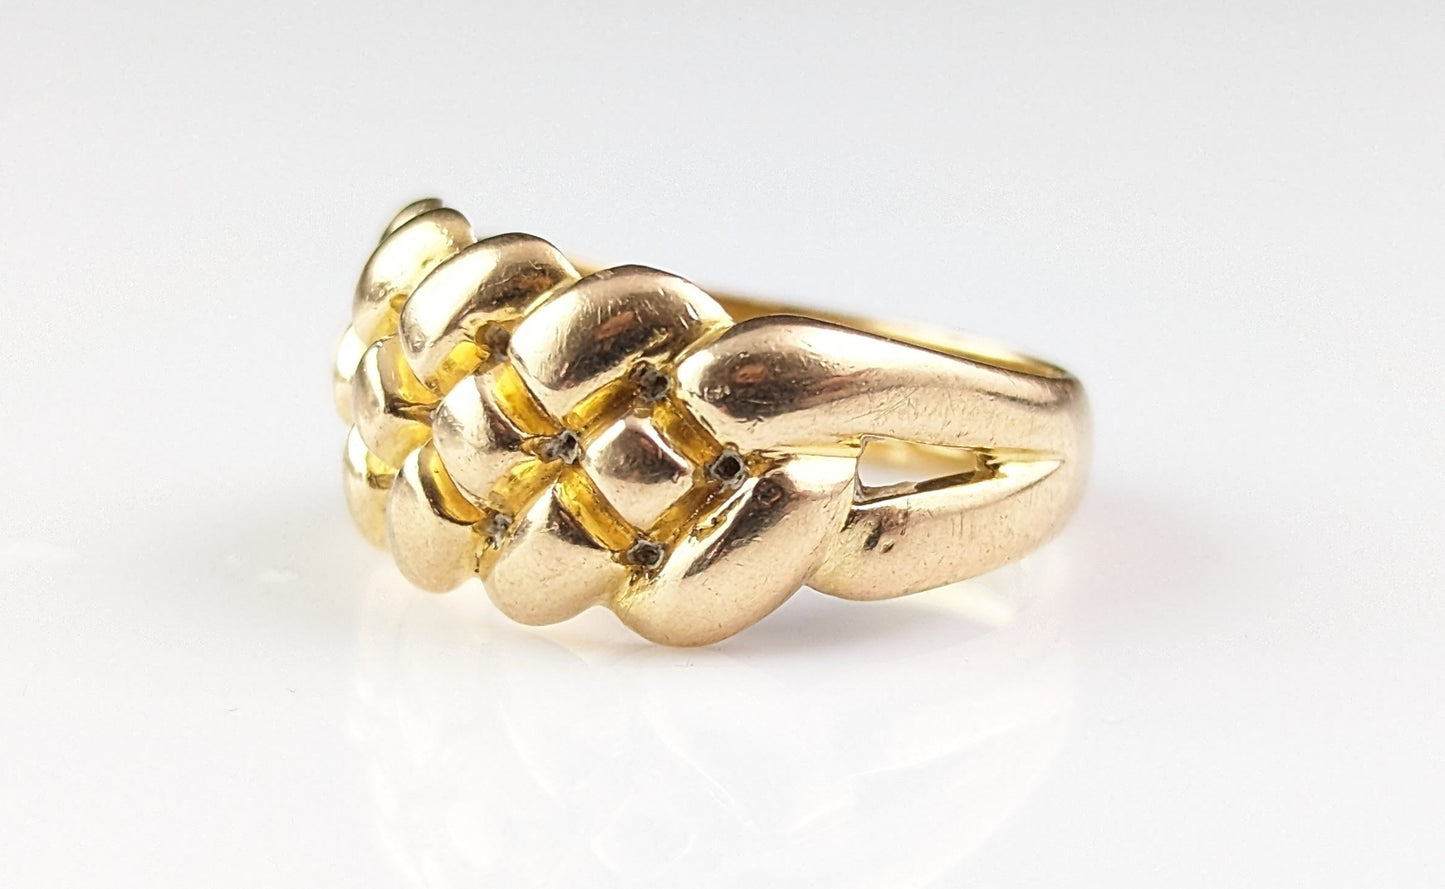 Antique 18ct gold Keeper ring, knot ring, Edwardian